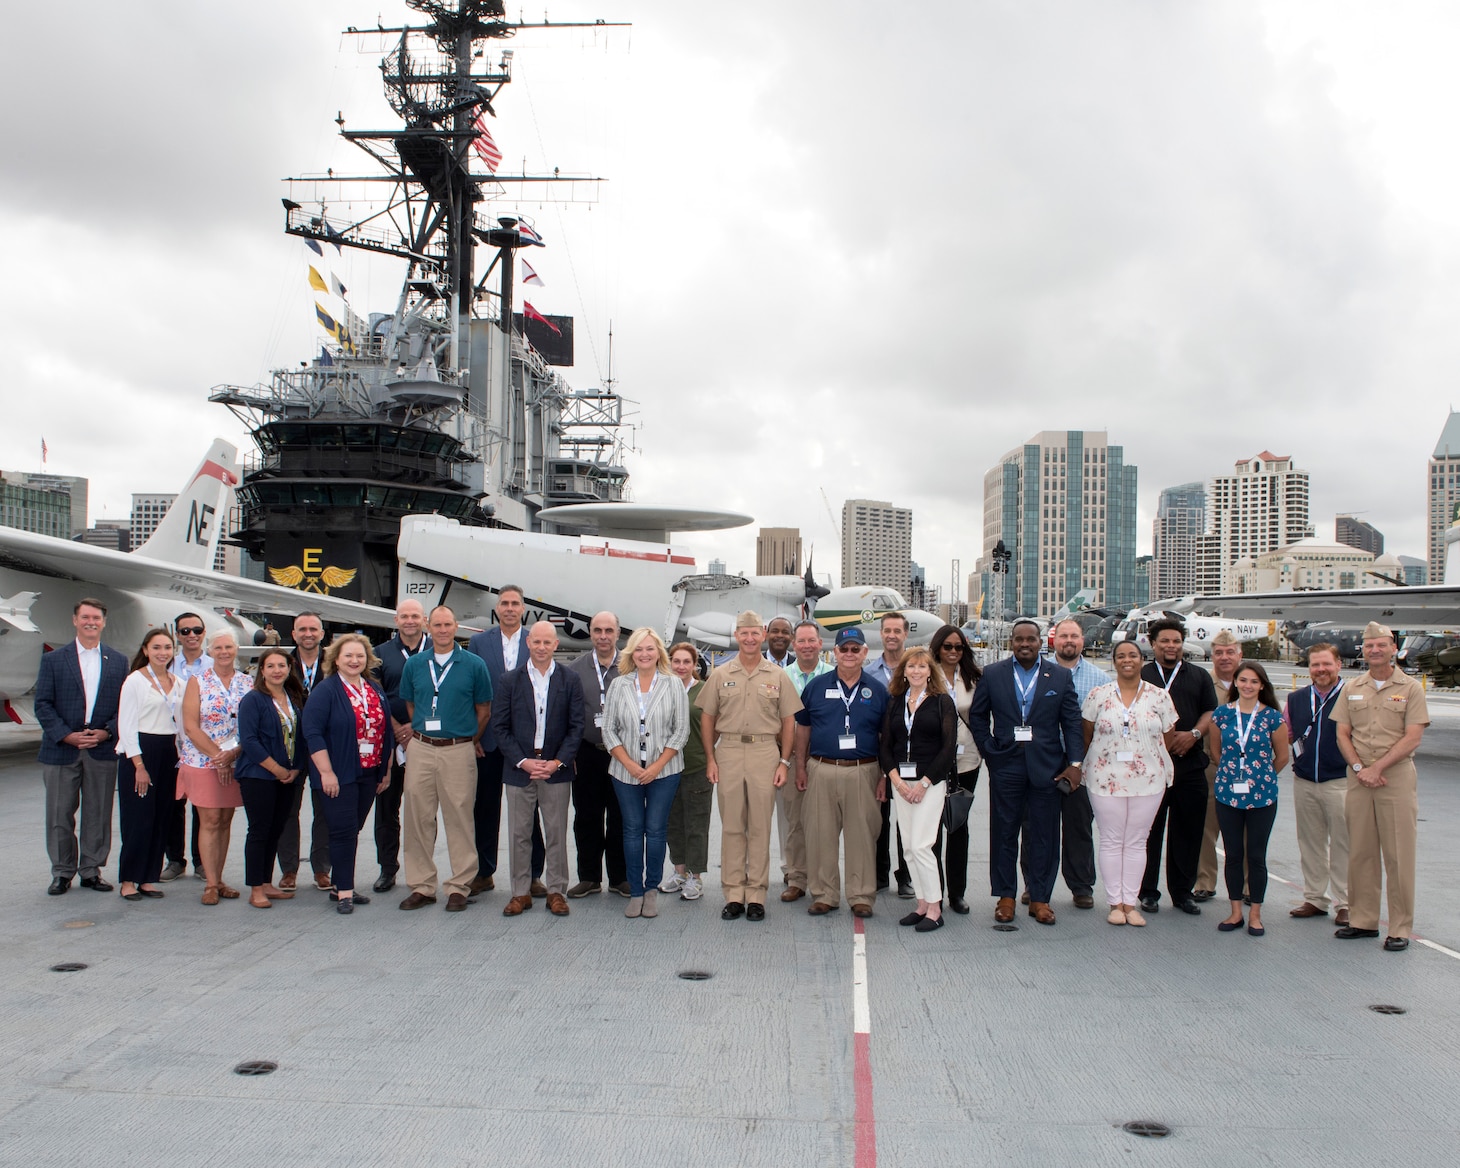 Chief of Navy Reserve Vice Adm. John Mustin, Commander, Navy Reserve Force and Rear Adm. John Schommer pose for a group photo with employer’s, aboard USS Midway Museum during a Navy Employer Recognition Event (NERE) in San Diego, August 20, 2021. Selected employers were nominated by their Navy Reserve employees for supporting their service and especially mobilization for the nation’s response to the COVID-19 pandemic, and invited to attend the one-day event that includes a tour of Midway, a static display of aircraft at Fleet Logistics Support Squadron (VR) 57, an equipment display by Maritime Expeditionary Security Squadron 1 and SEAL Team 17. The Navy Reserve mobilized 2,875 service members in 2020 under the presidential authorization for DoD’s support to the nation’s pandemic.